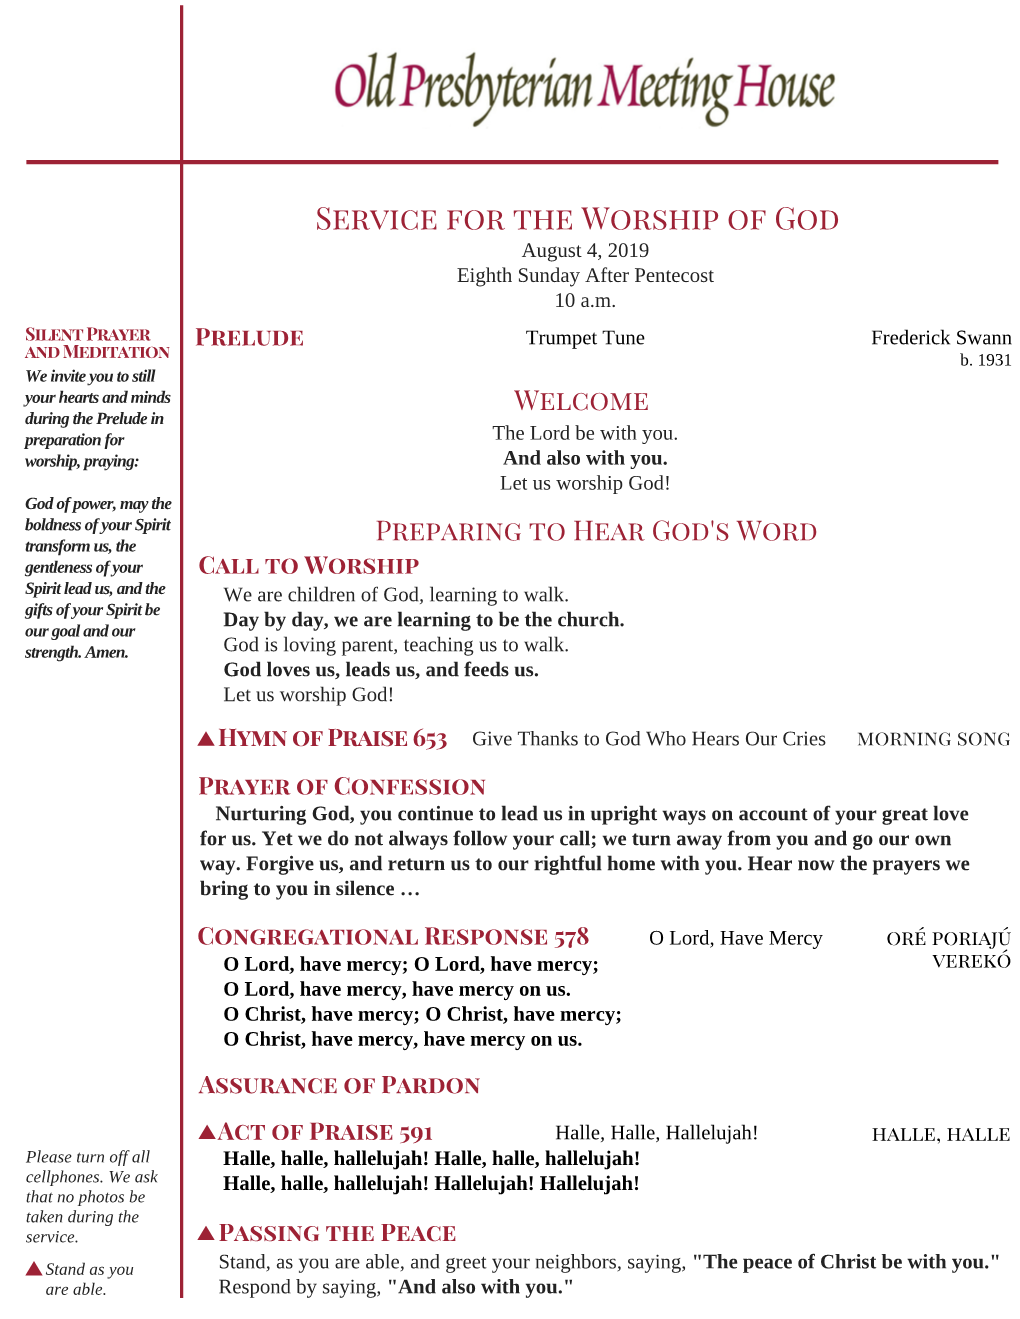 Service for the Worship of God August 4, 2019 Eighth Sunday After Pentecost 10 A.M